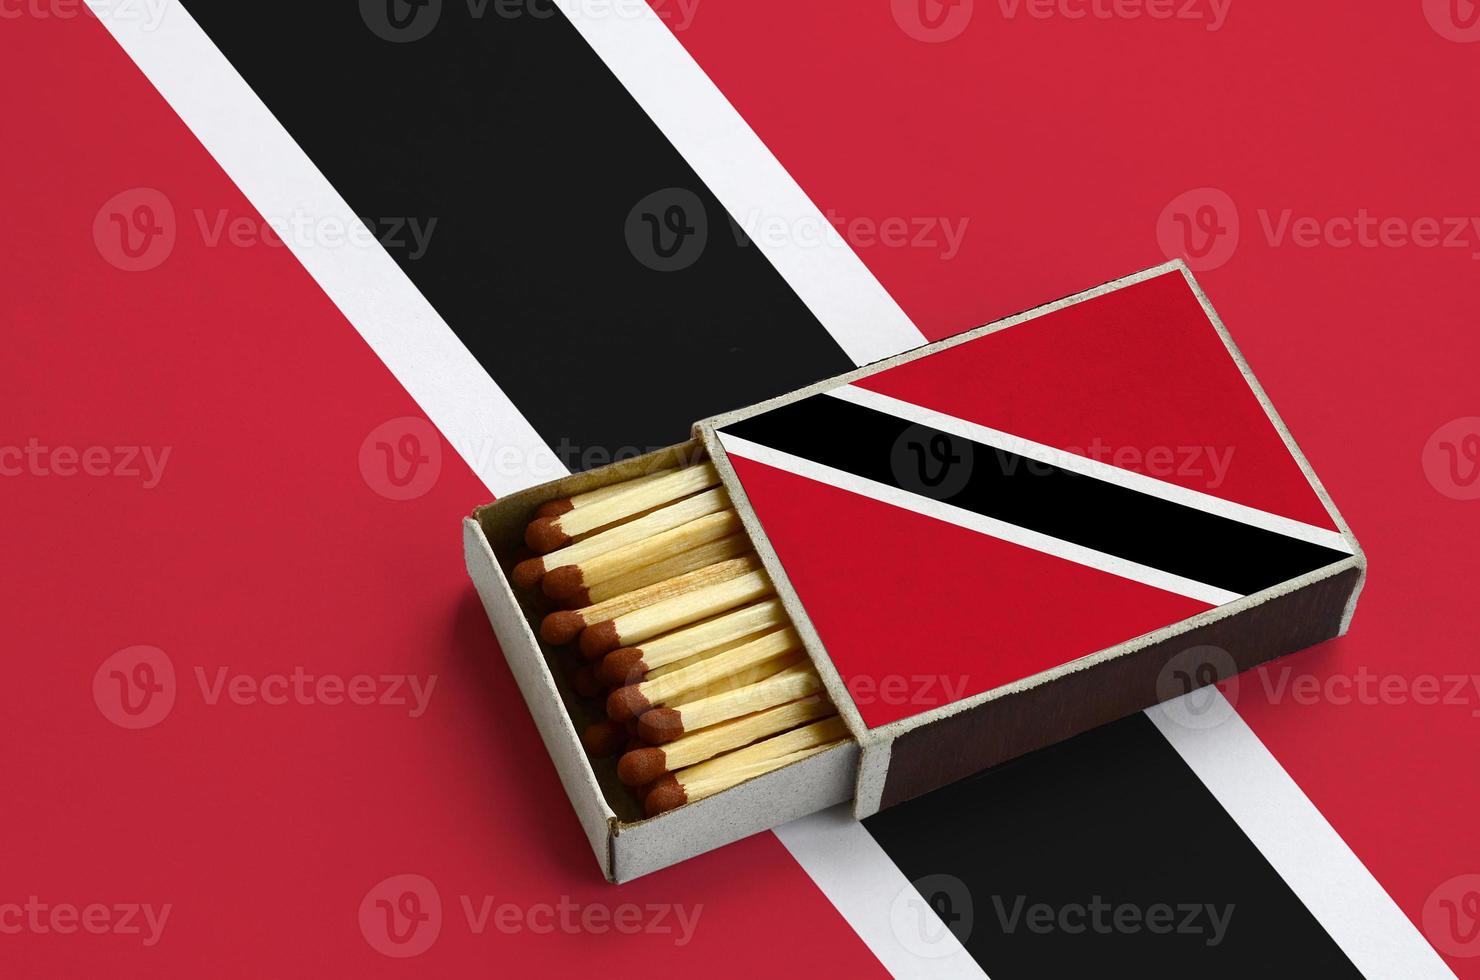 Trinidad and Tobago flag is shown in an open matchbox, which is filled with matches and lies on a large flag photo